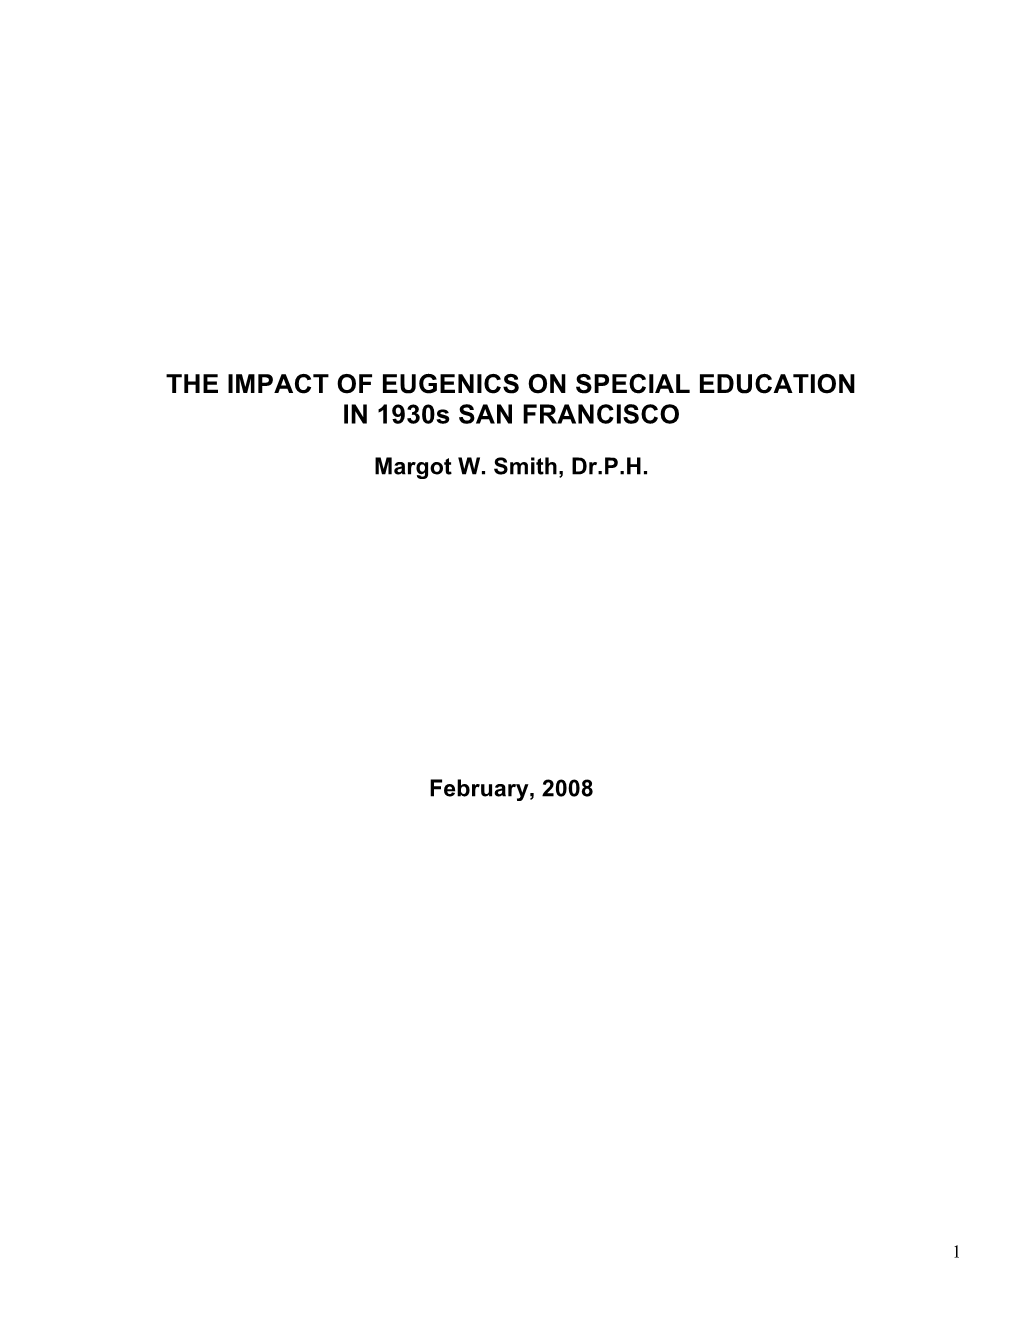 THE IMPACT of EUGENICS on SPECIAL EDUCATION in 1930S SAN FRANCISCO